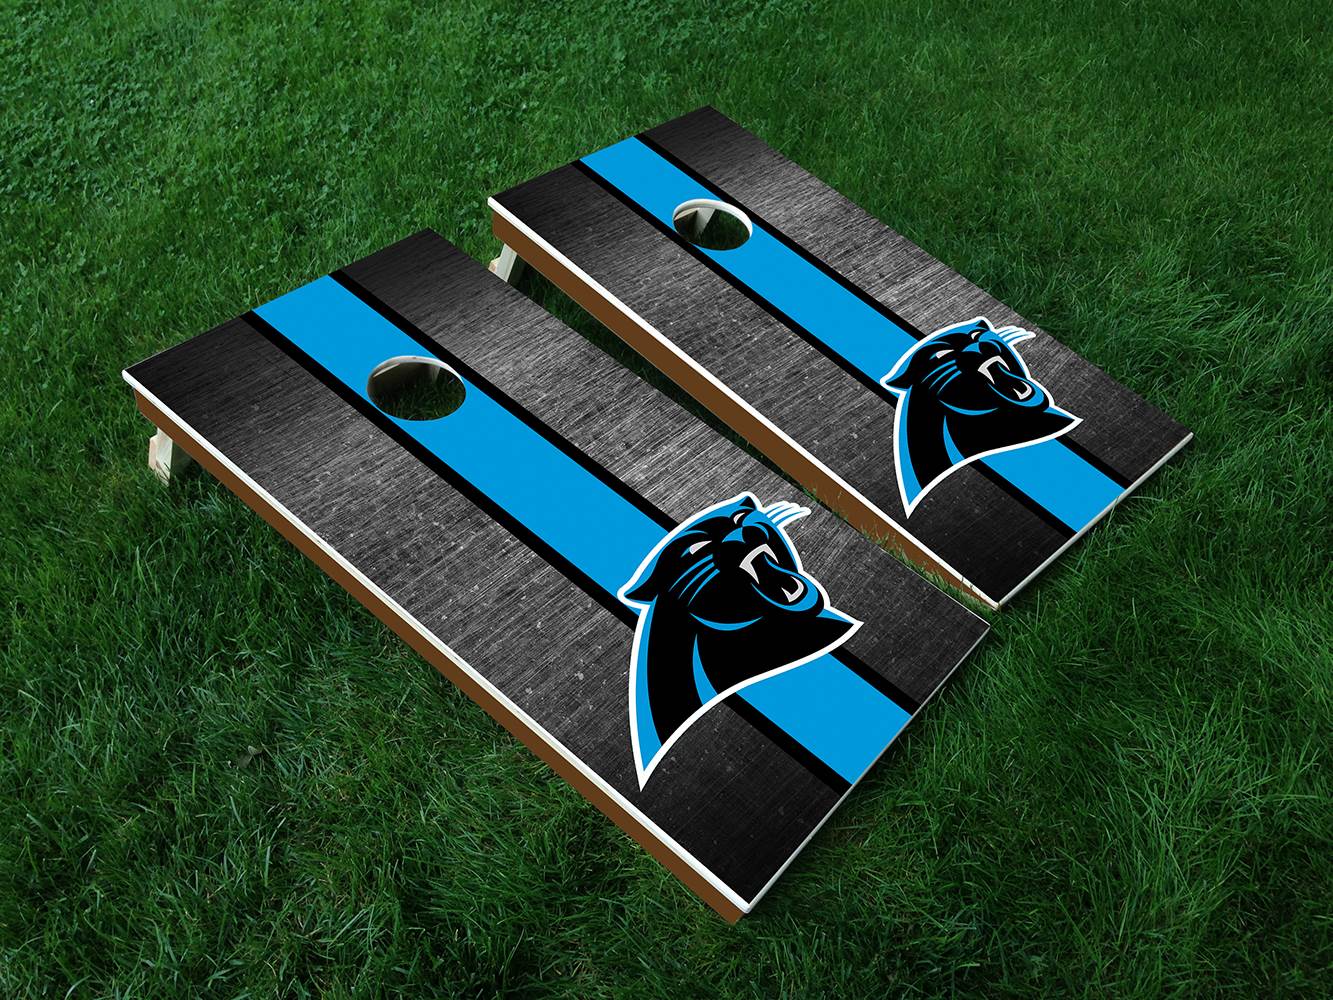 panthers_MockUp.jpg  by Michael